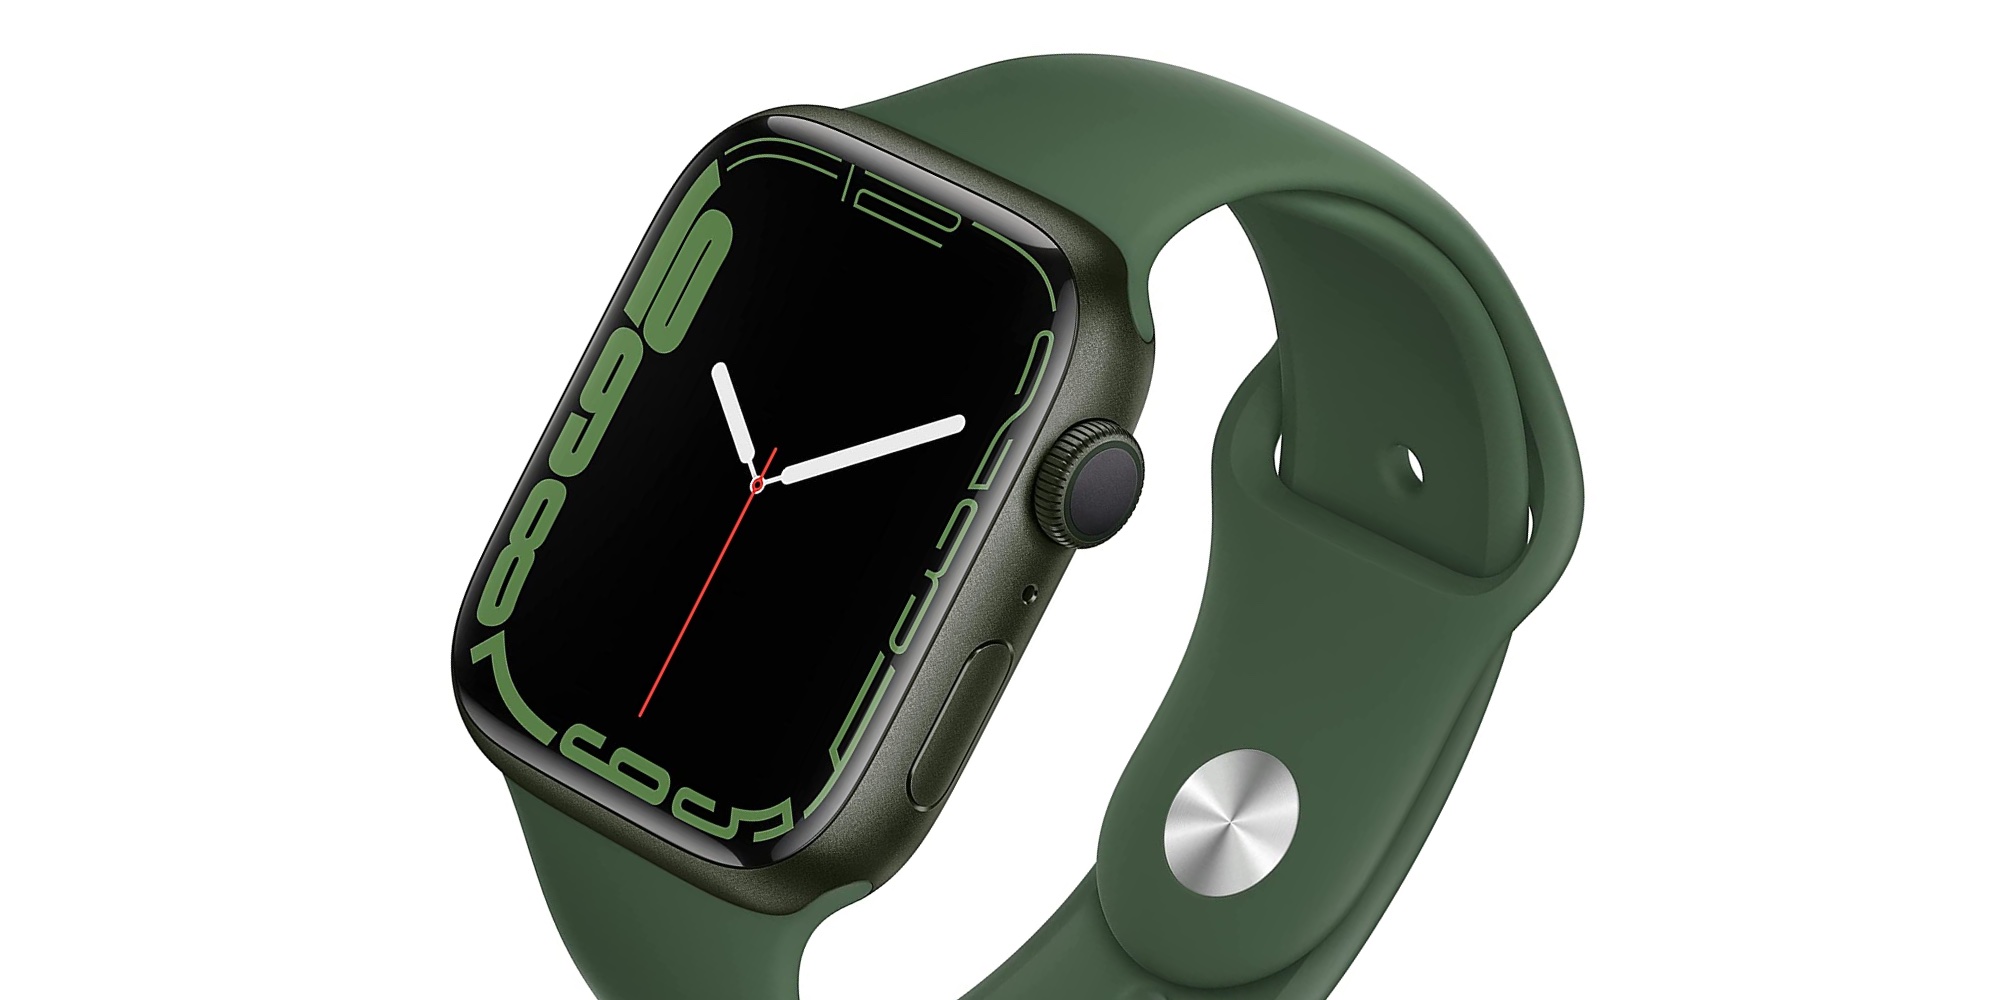 Apple Watch Series 7 fall to new all-time lows from $279 (Save $120 